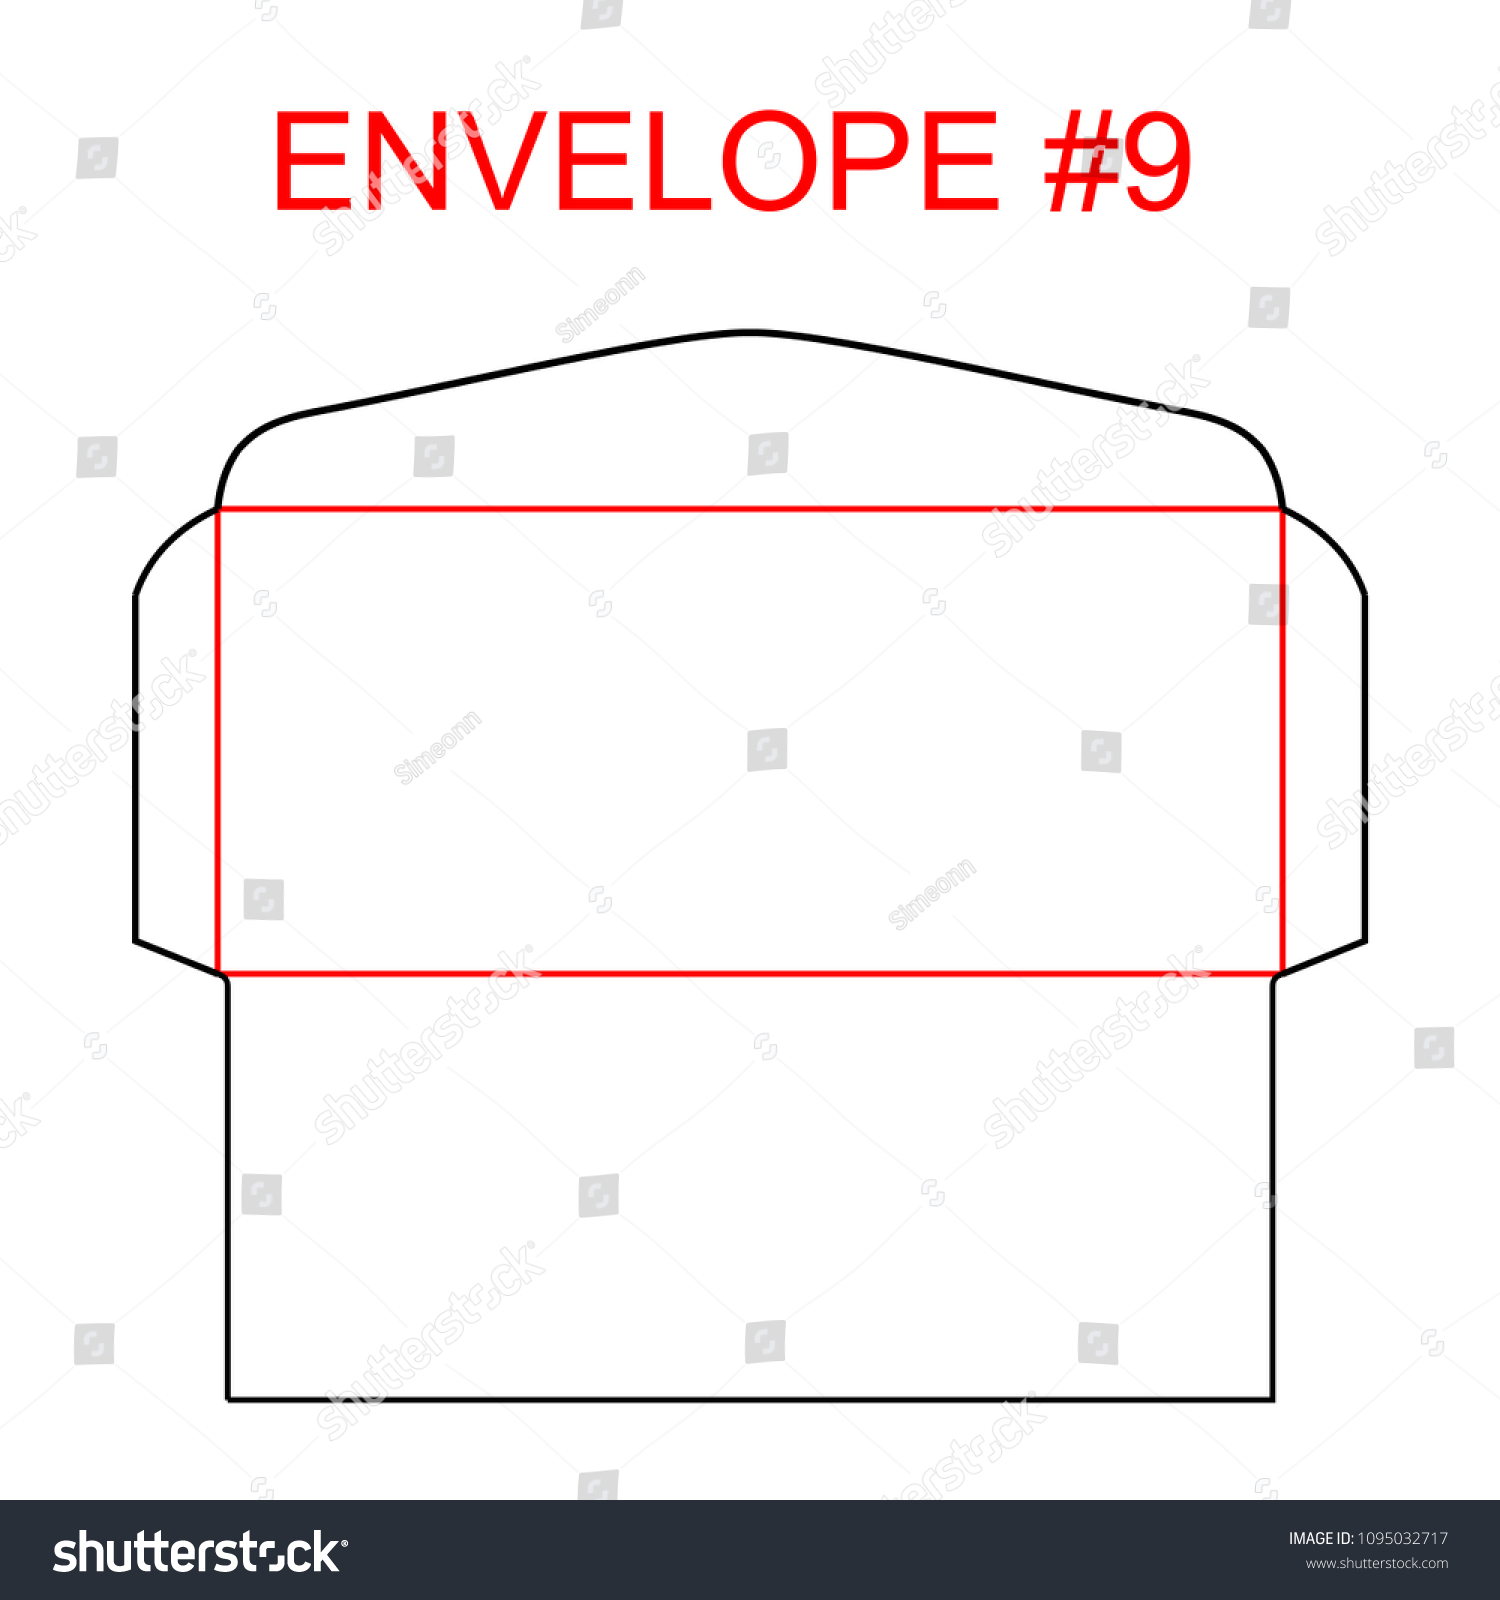 Envelope #9 Template from image.shutterstock.com